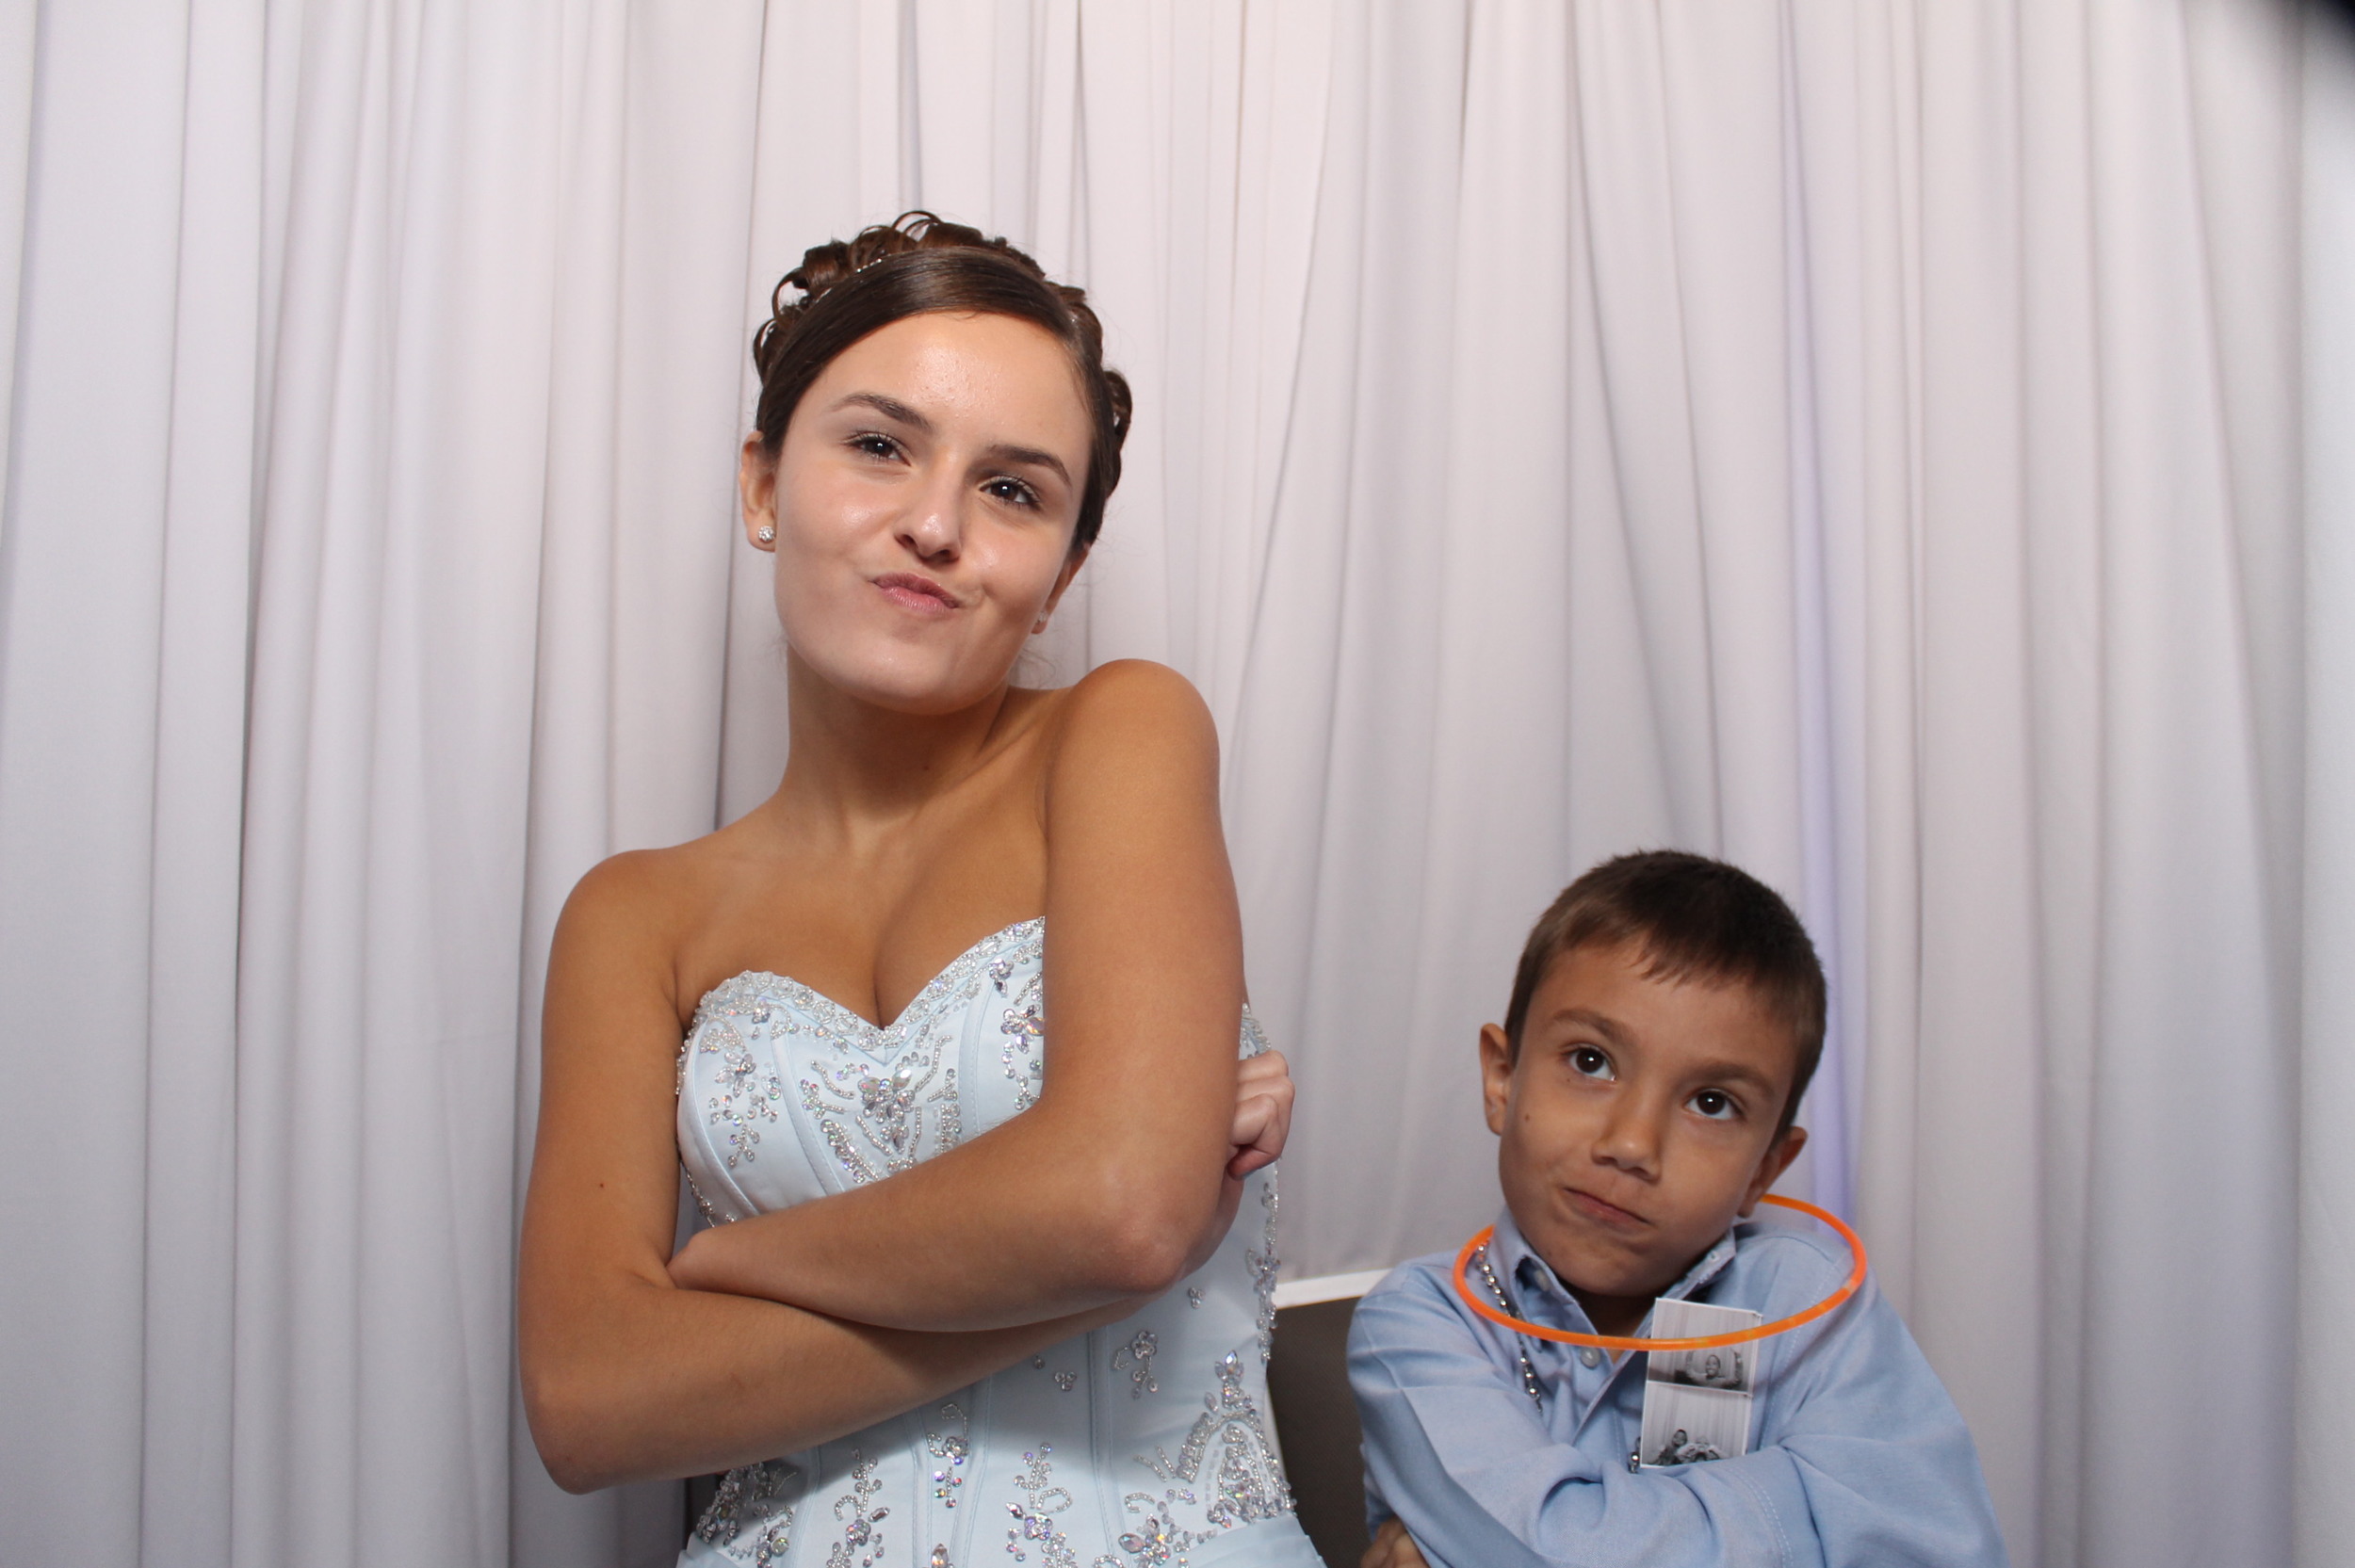 Snapshot Photobooths at the Radisson in Freehold, New Jersey